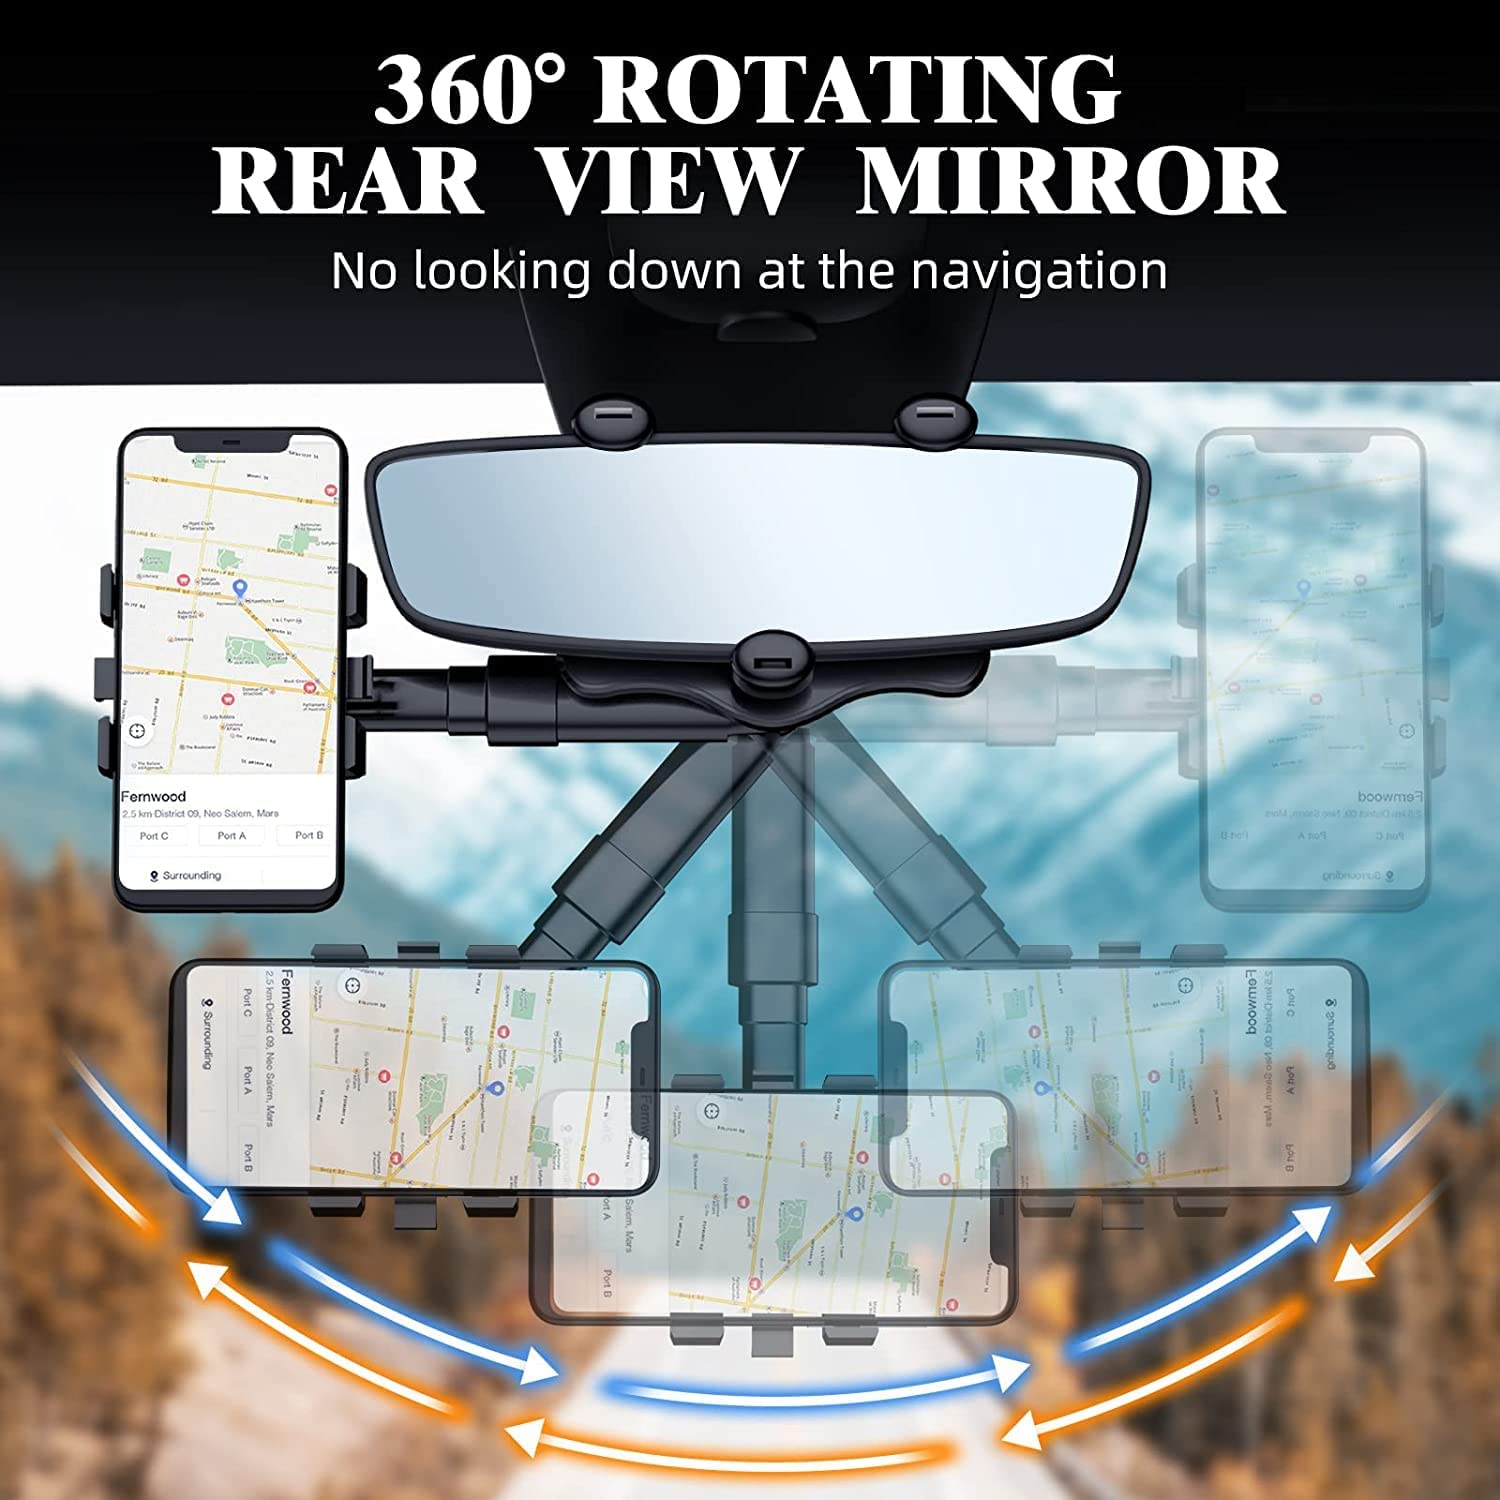 Car Rearview Phone Holder 360° Rotatable and Retractable Adjustable Phone Stand for Car Compatible with All Mobile Phones